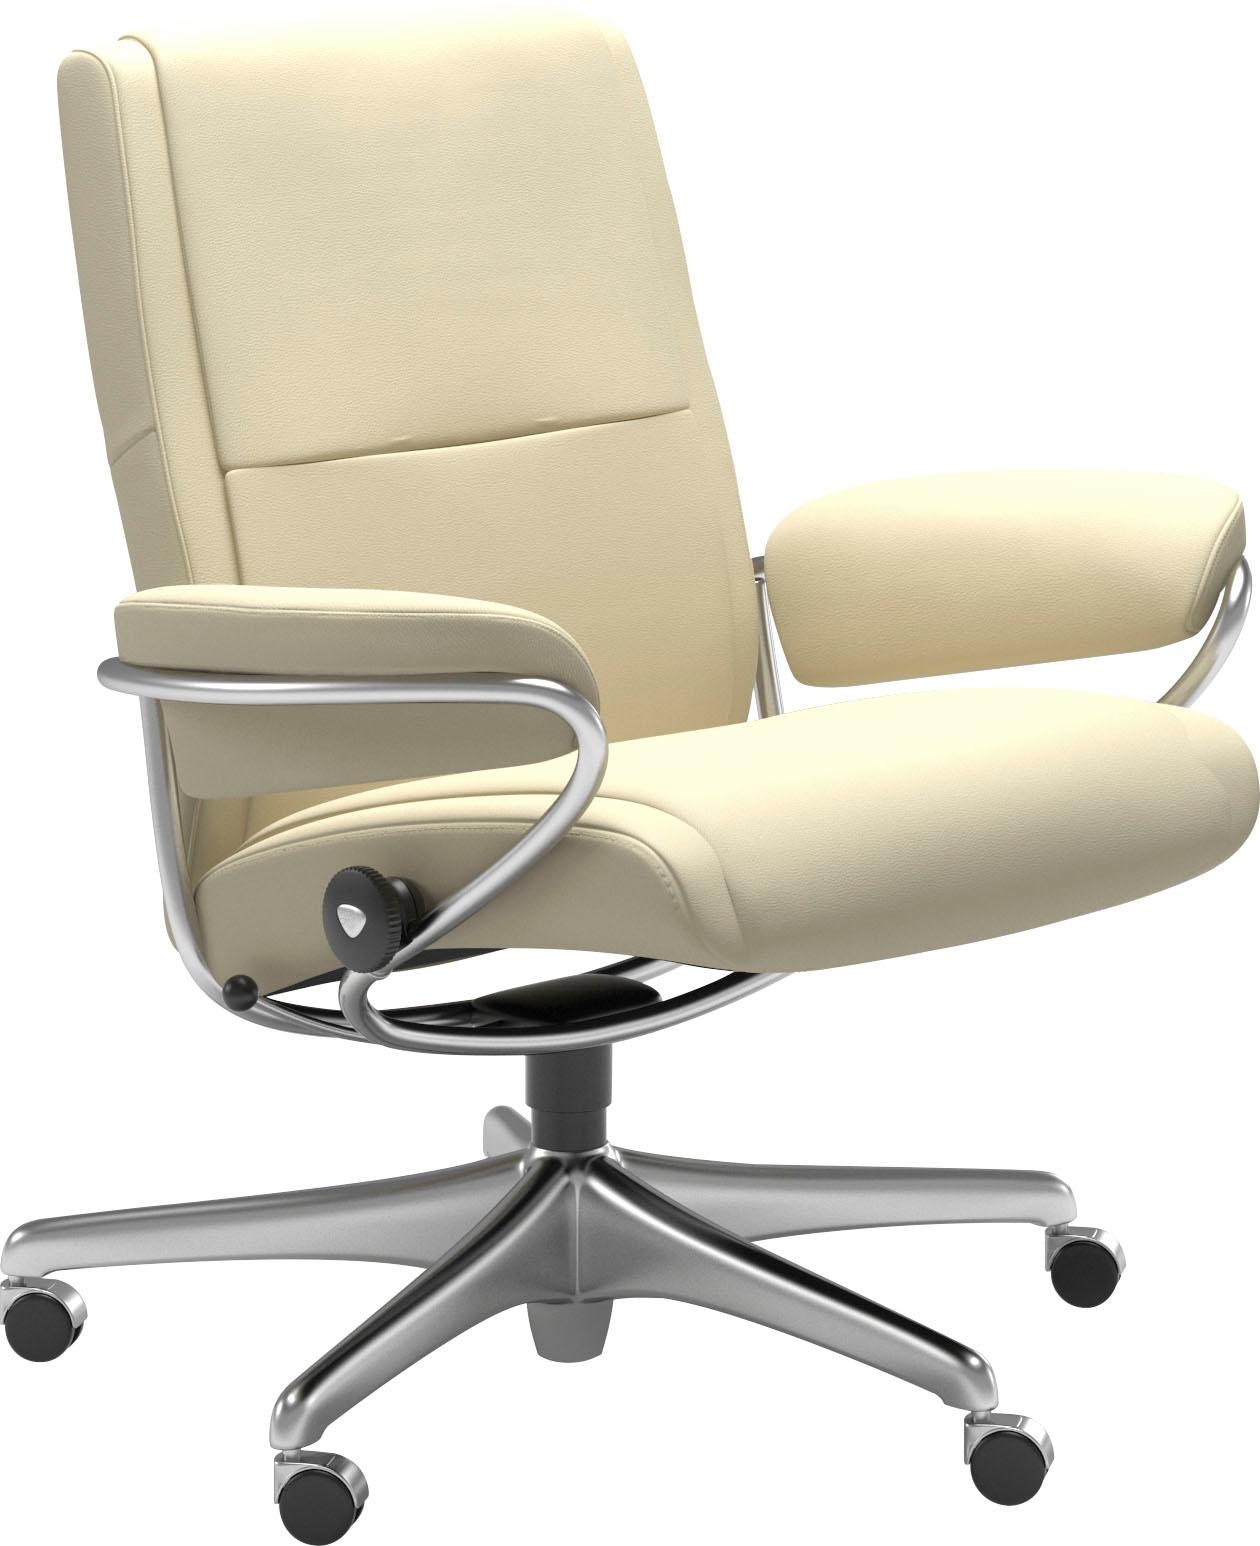 BAUR »Paris«, Stressless® Low Relaxsessel | mit Back, kaufen Office Base, Home Chrom Gestell